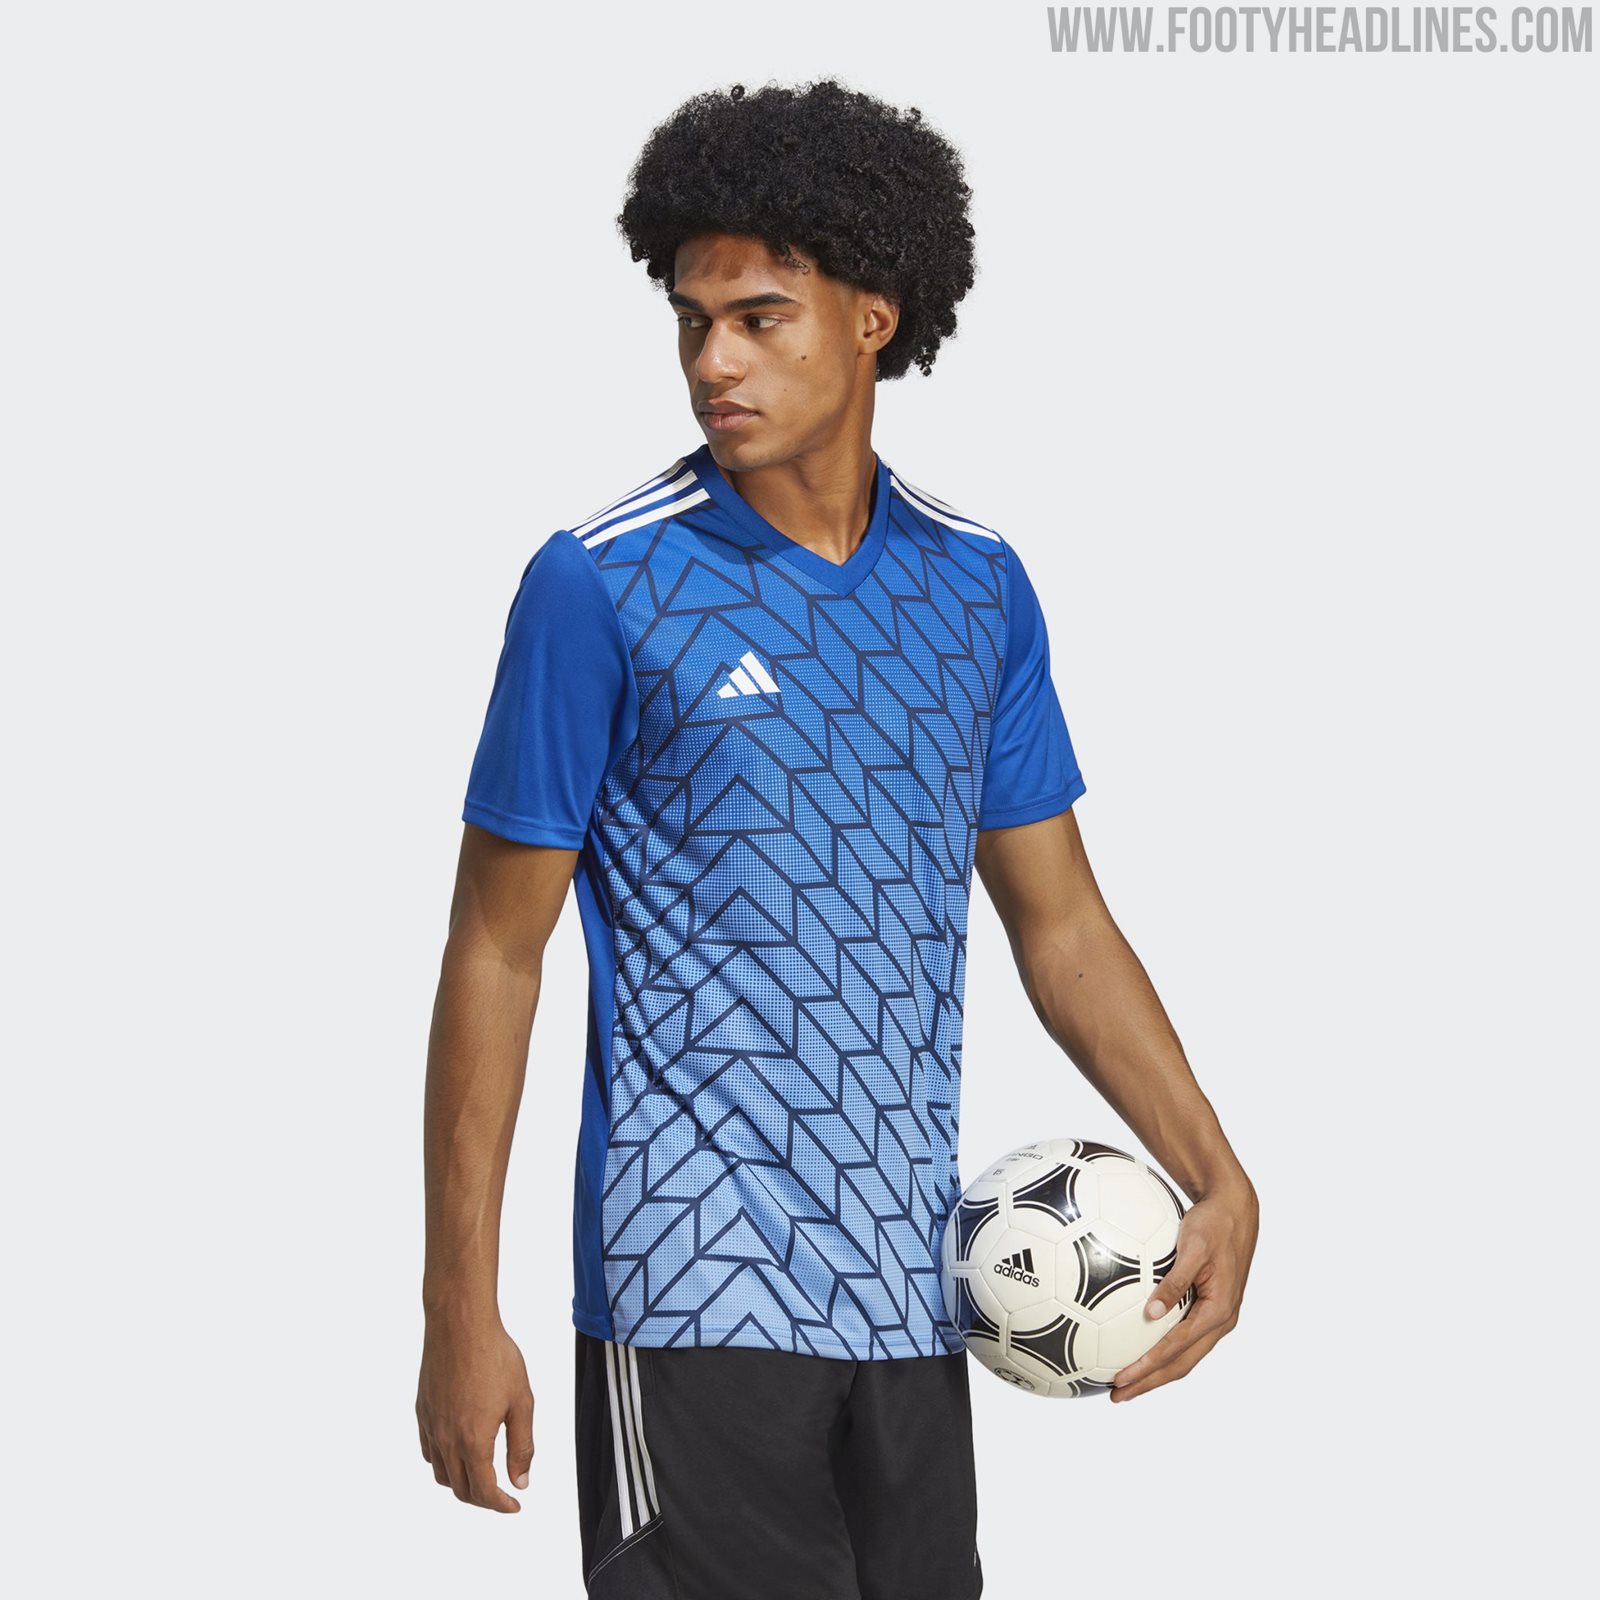 Inspired Iconic 1980s - Adidas 'Team Icon 23 Jersey' Leaked - 2023-24 Teamwear - Footy